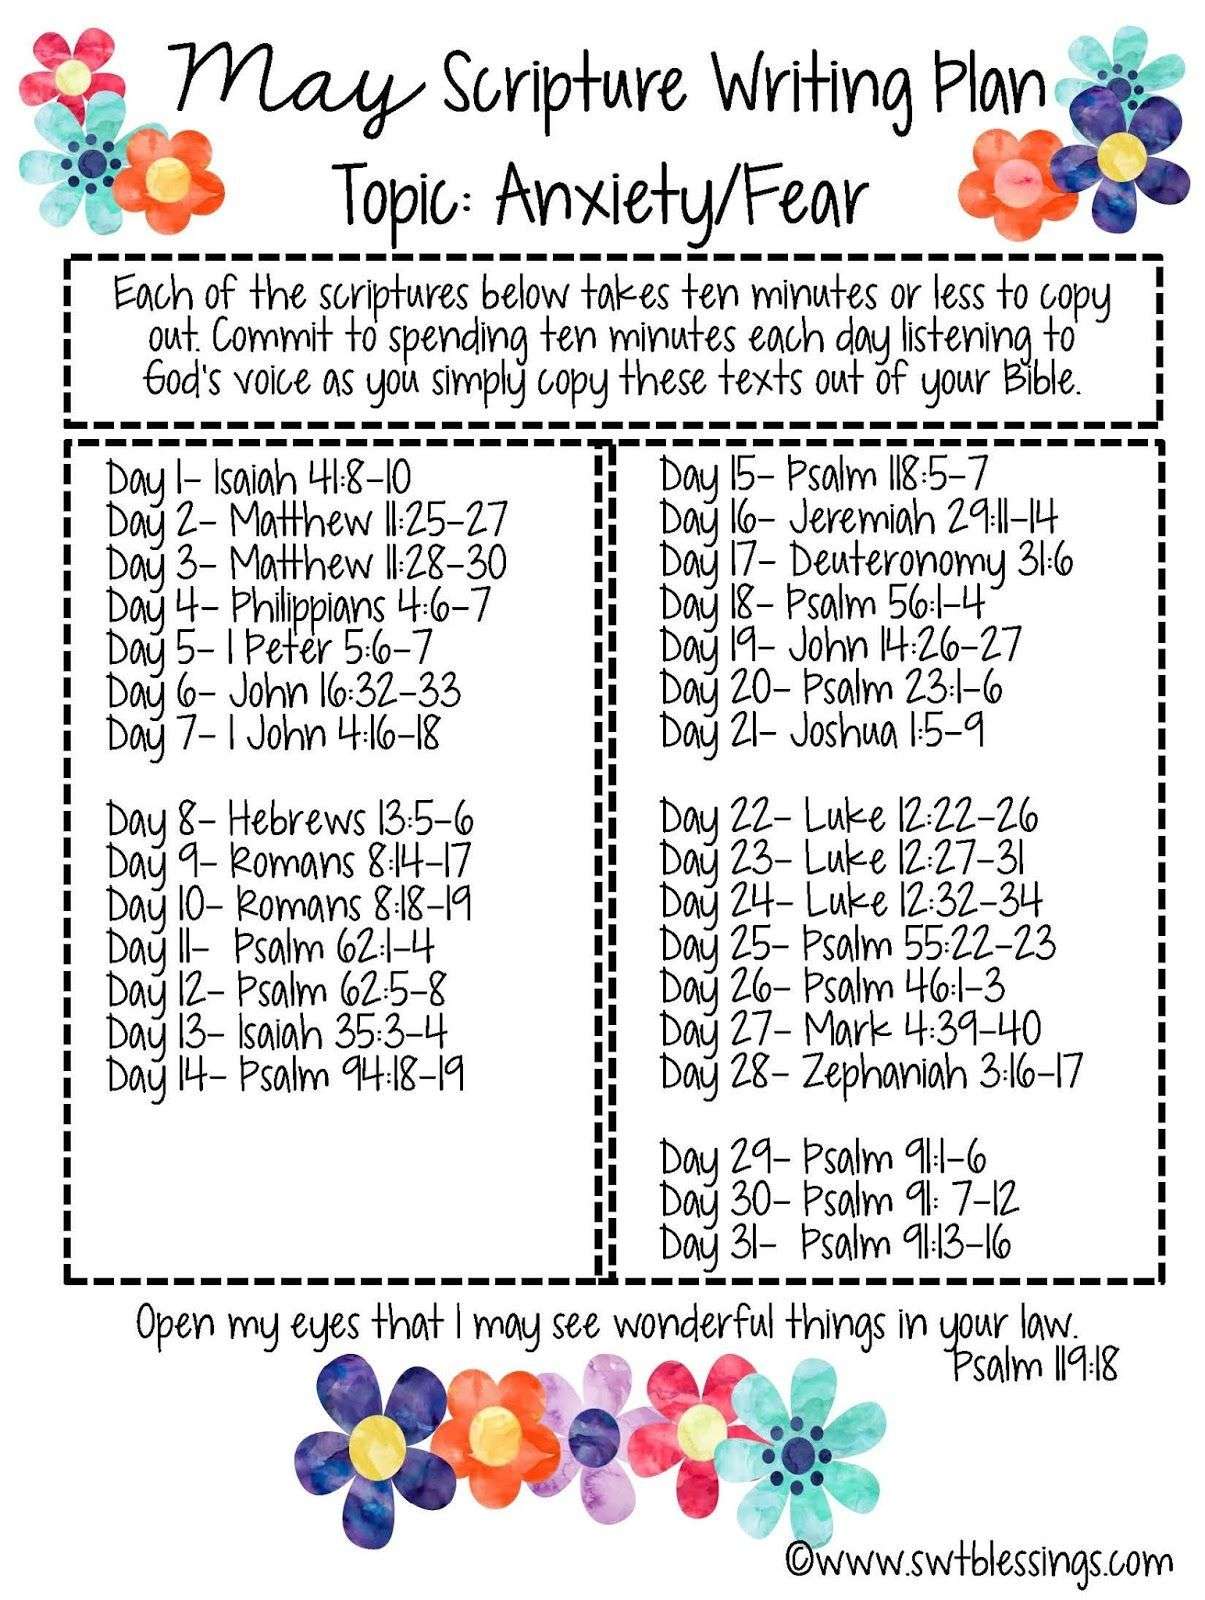 Sweet Blessings: May Scripture Writing Plan 2016 #God